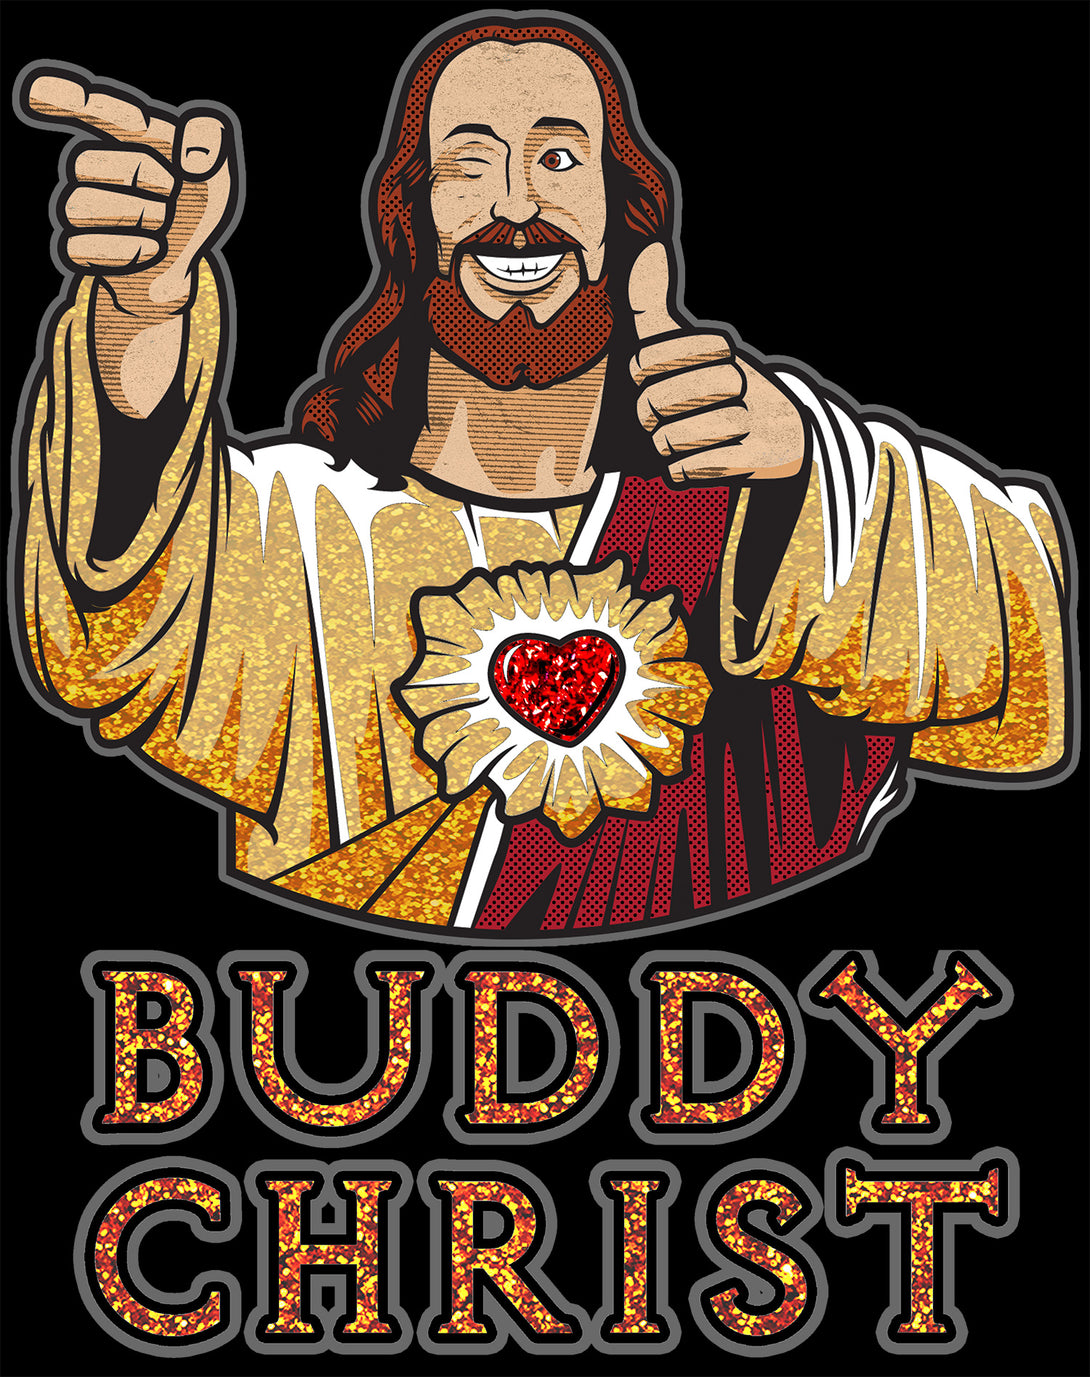 Kevin Smith View Askewniverse Buddy Christ Got Golden Wow Edition Official Sweatshirt Black - Urban Species Design Close Up